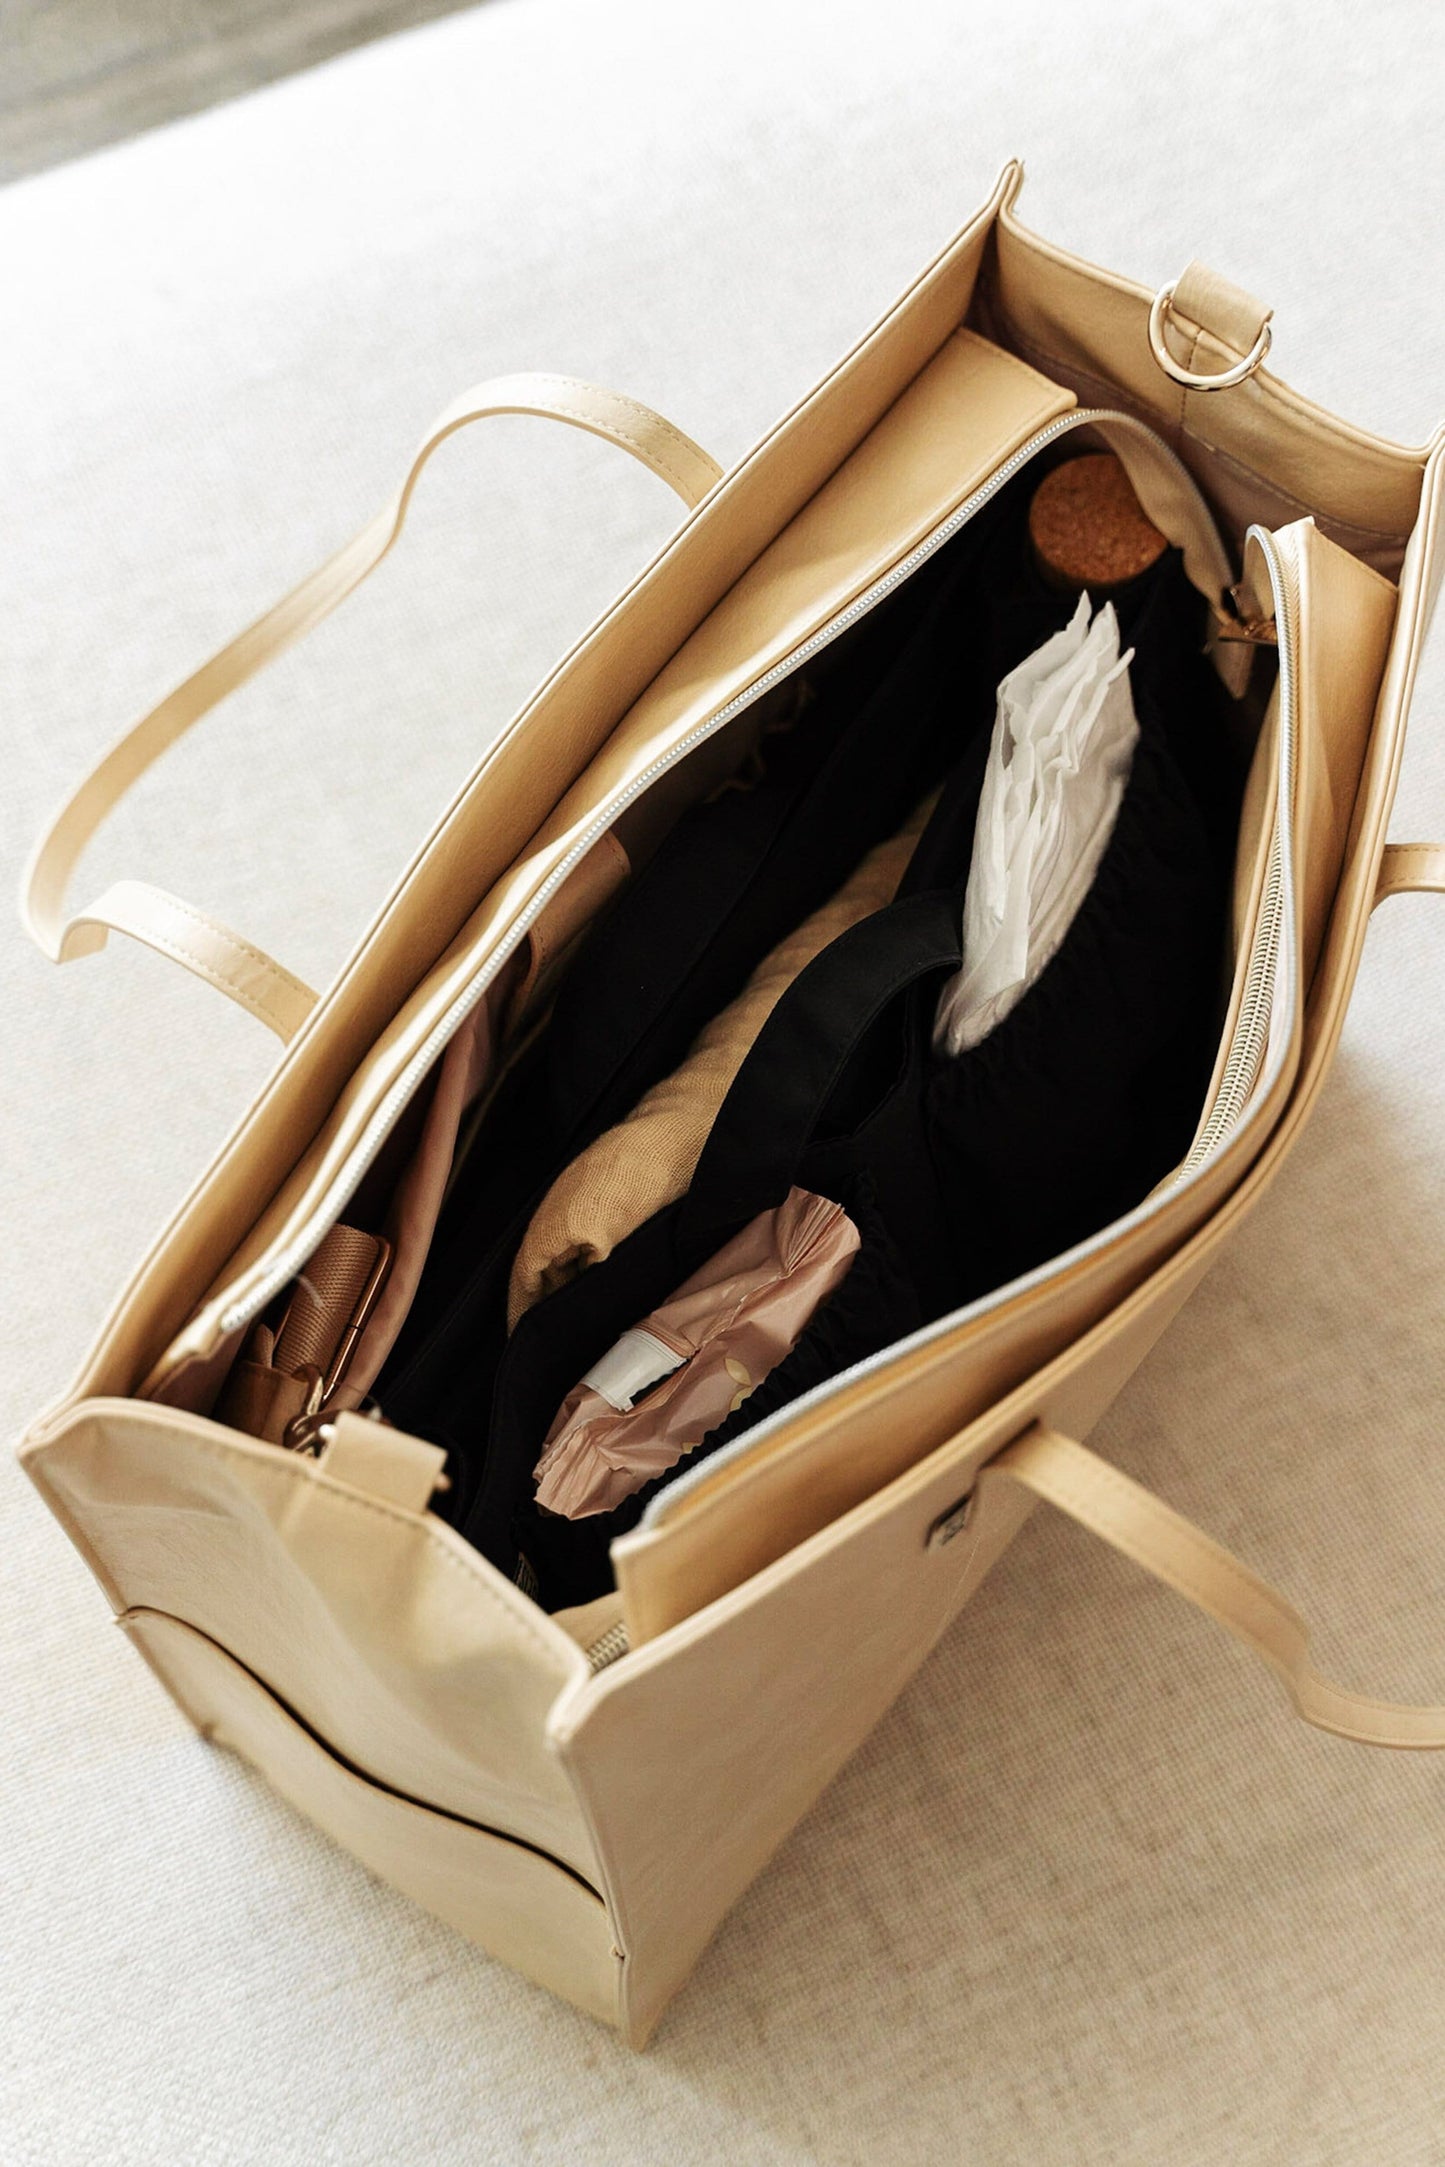 Our Original baby Bag Insert is suited for medium to large totes